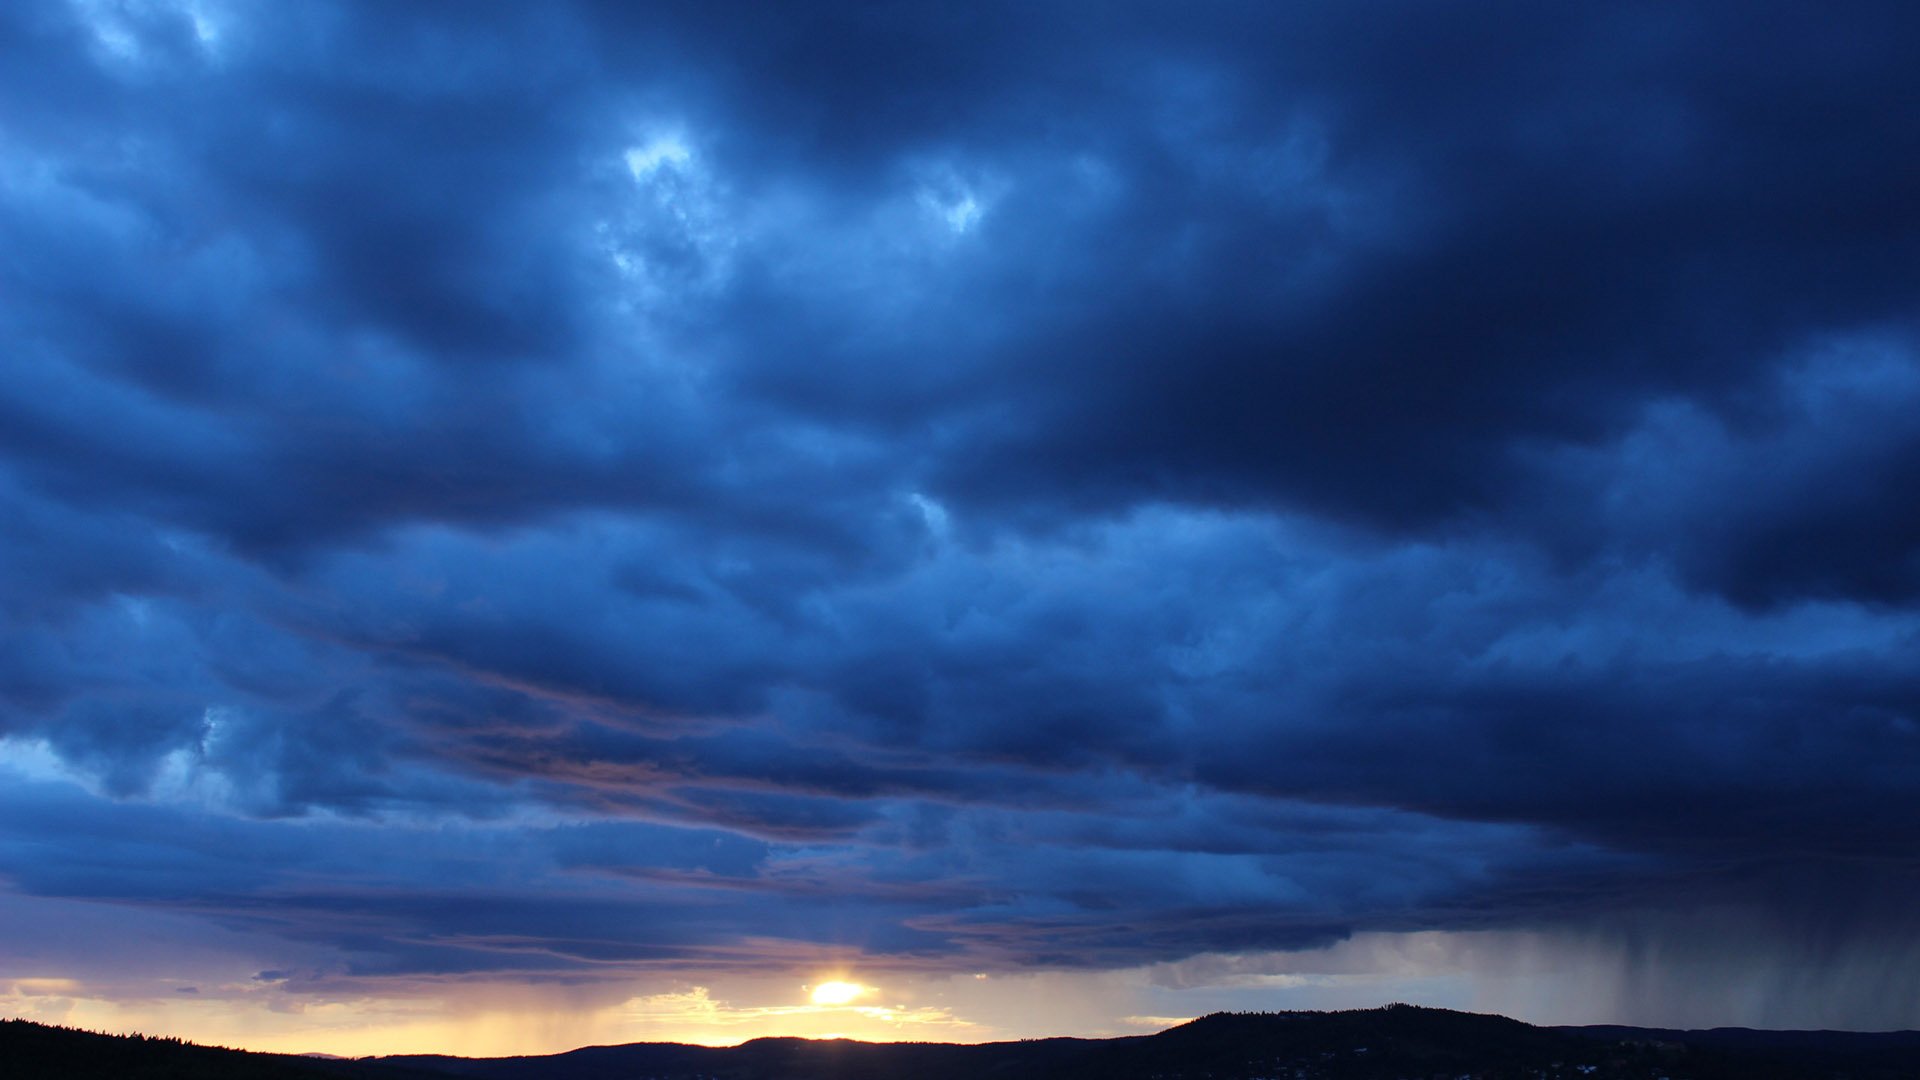 Dark Blue Clouds Hd Wallpaper Background Image 1920x1080 Id 996783 Wallpaper Abyss